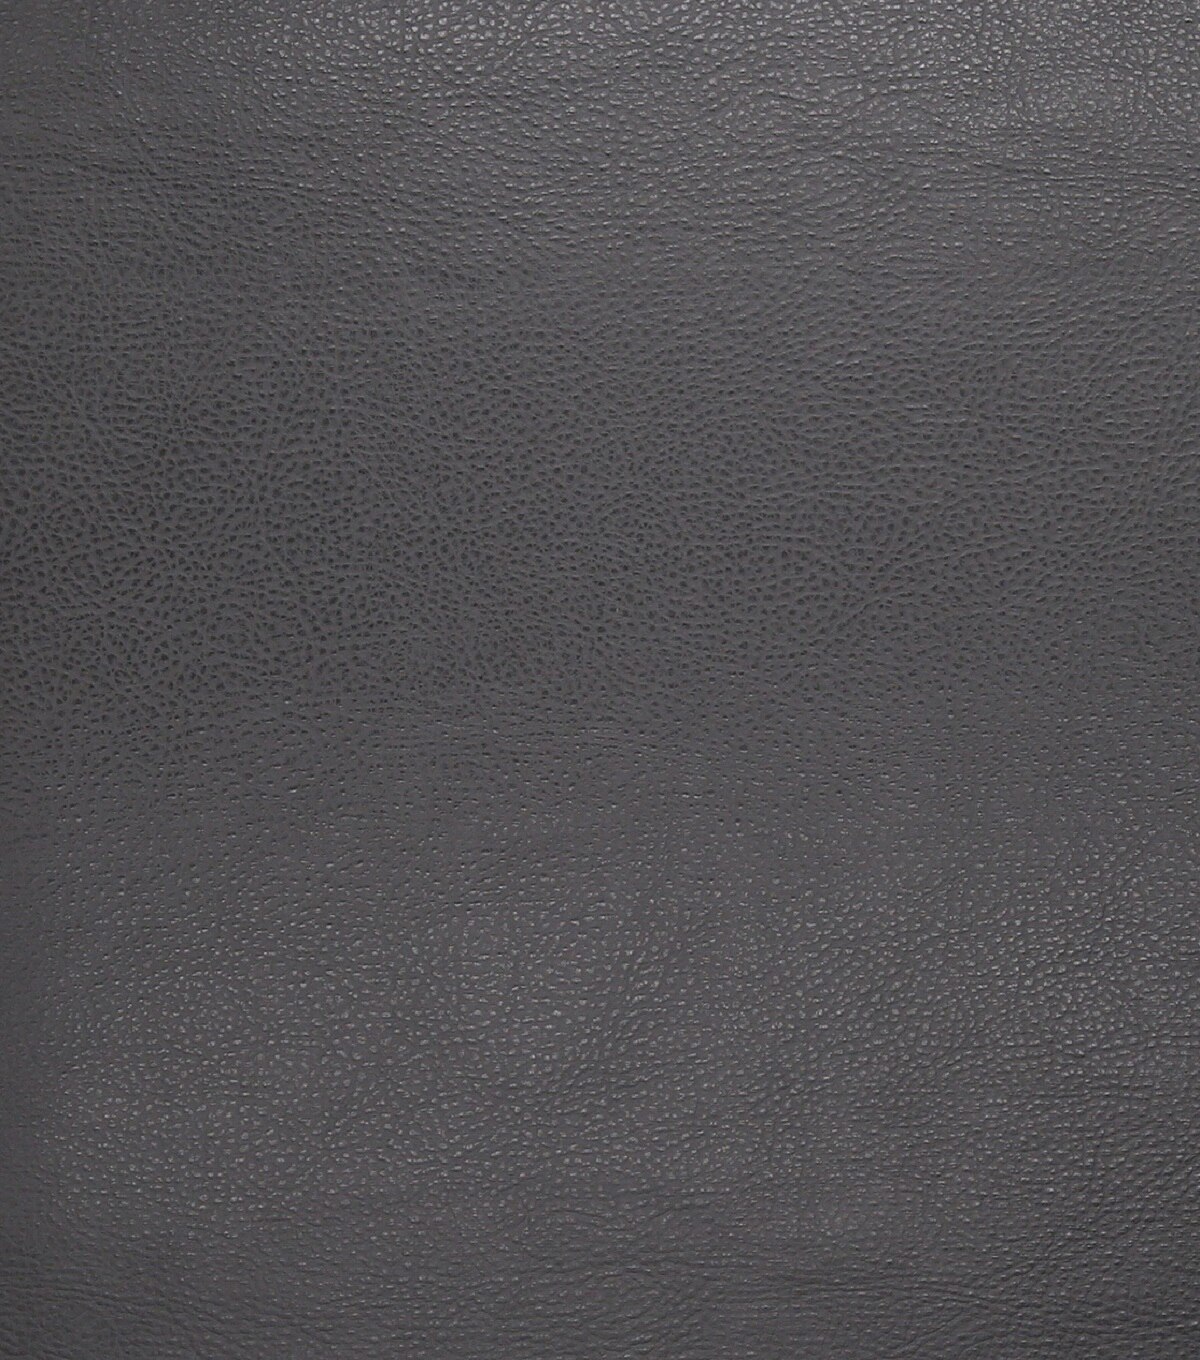 black pleather material